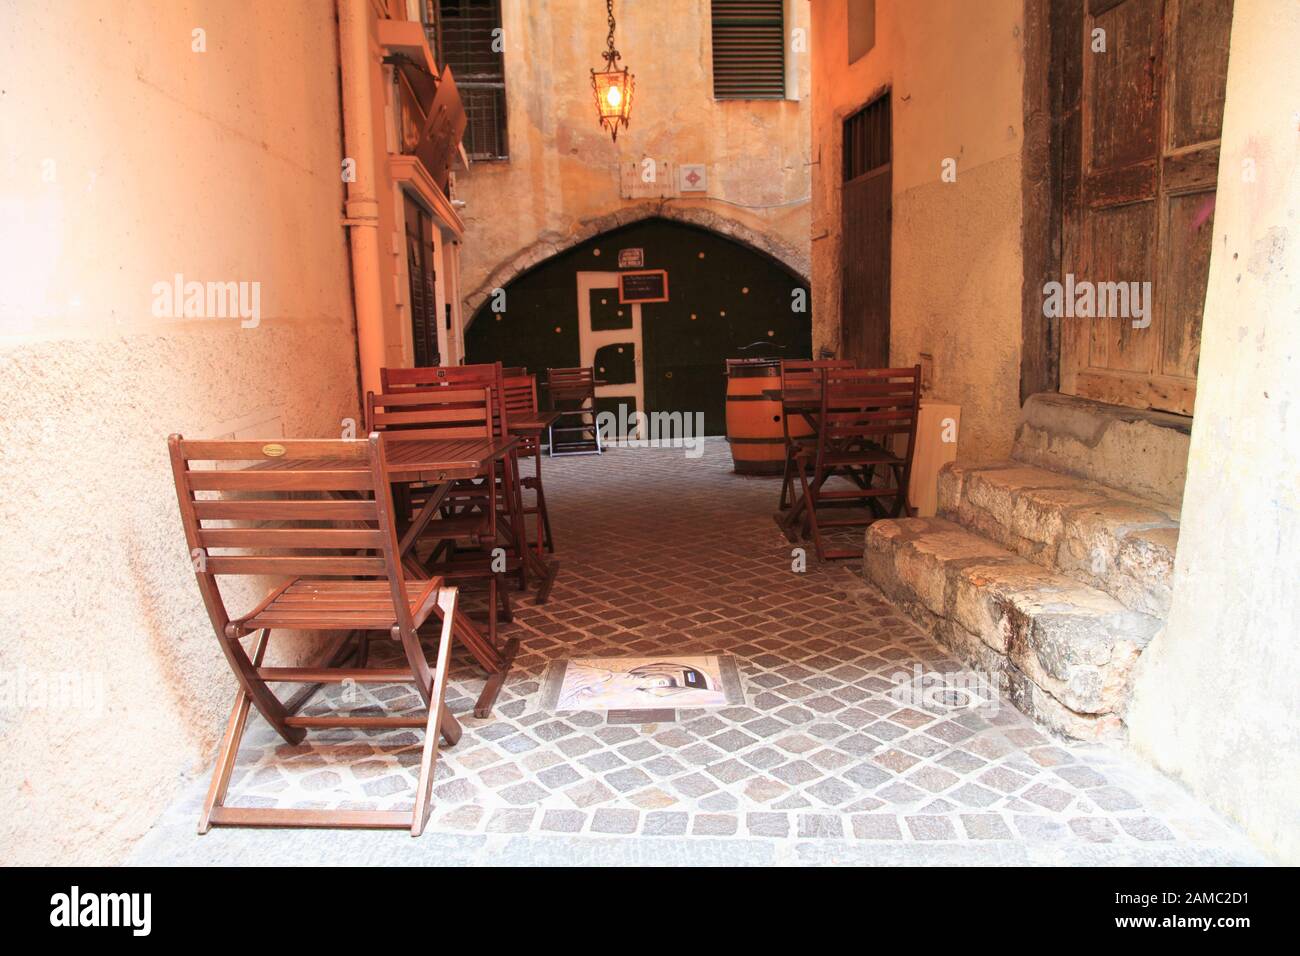 Cafe, Rue Obscure, Dark Passage, 13th Century, Villefranche sur Mer, Cote d Azur, French Riviera, Provence, France, Europe Stock Photo